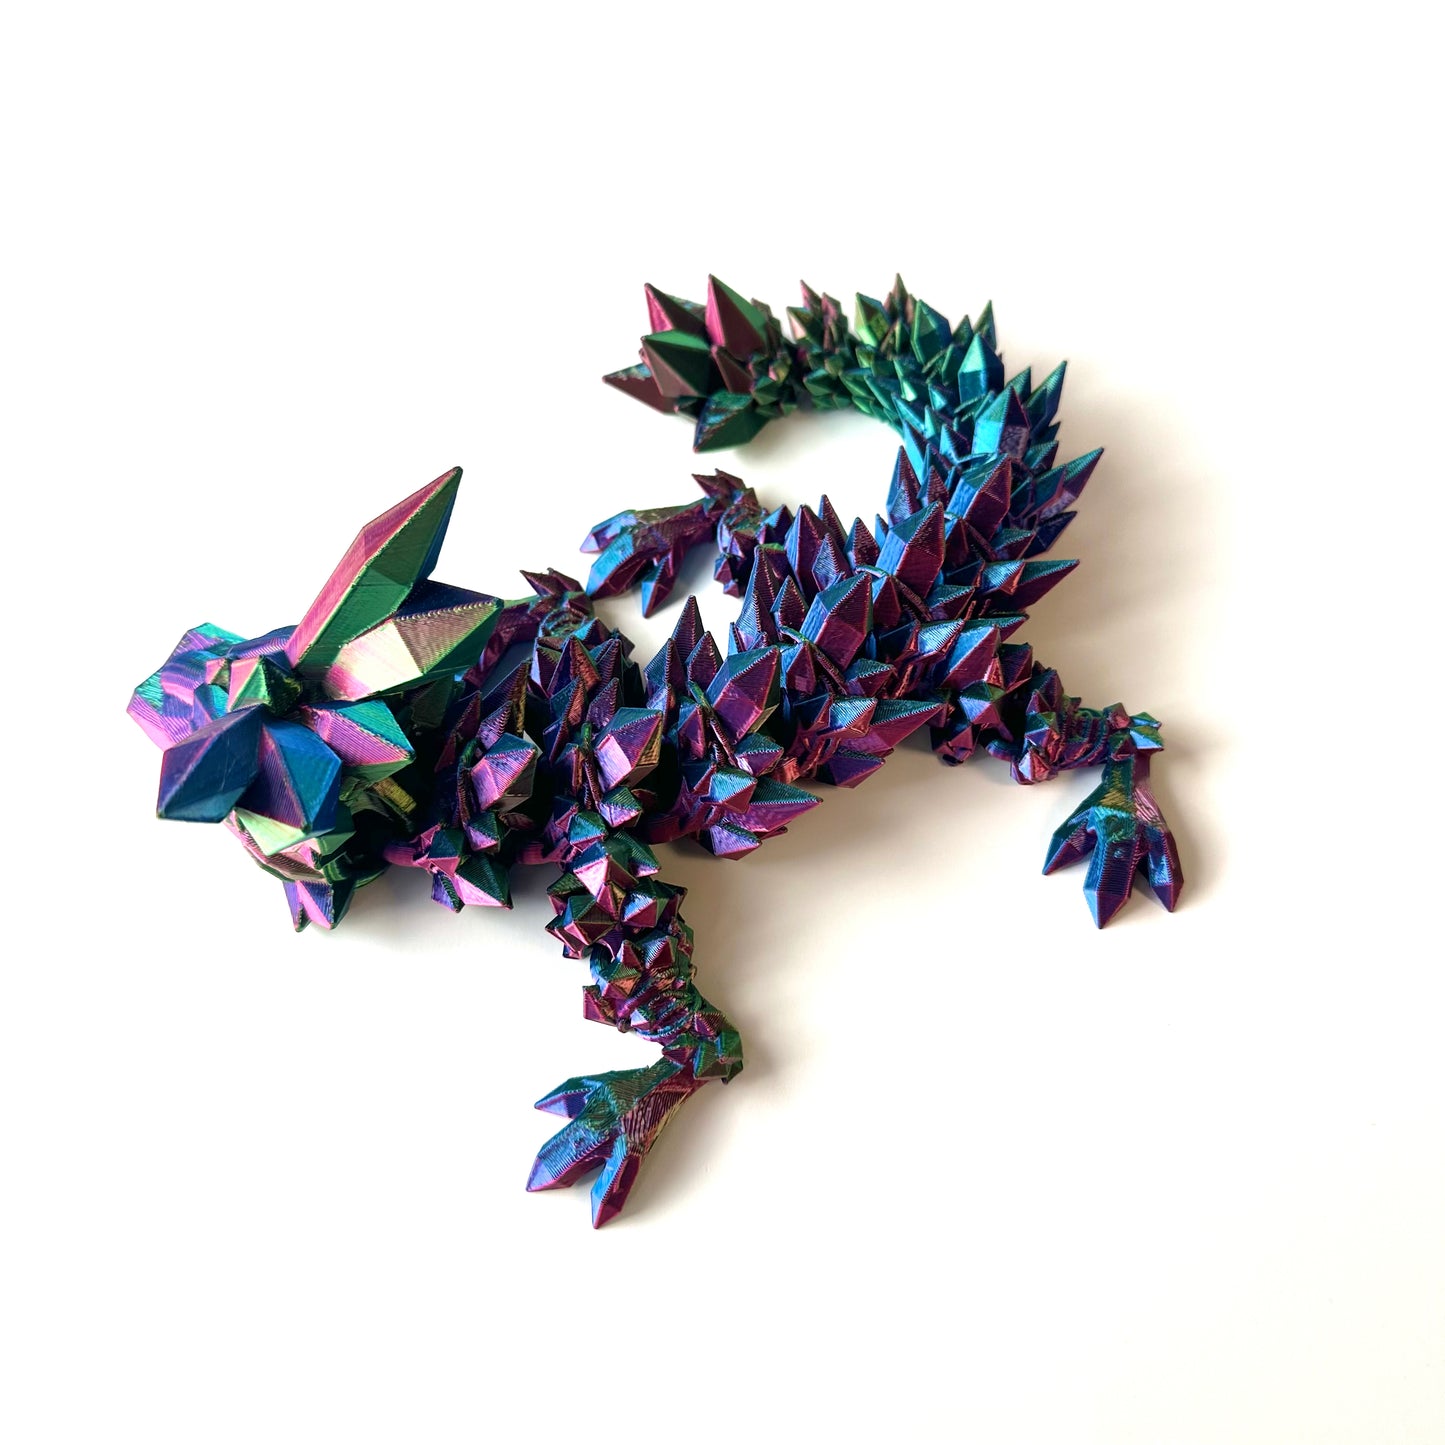 Baby Crystal Dragon - 3D Printed Articulating